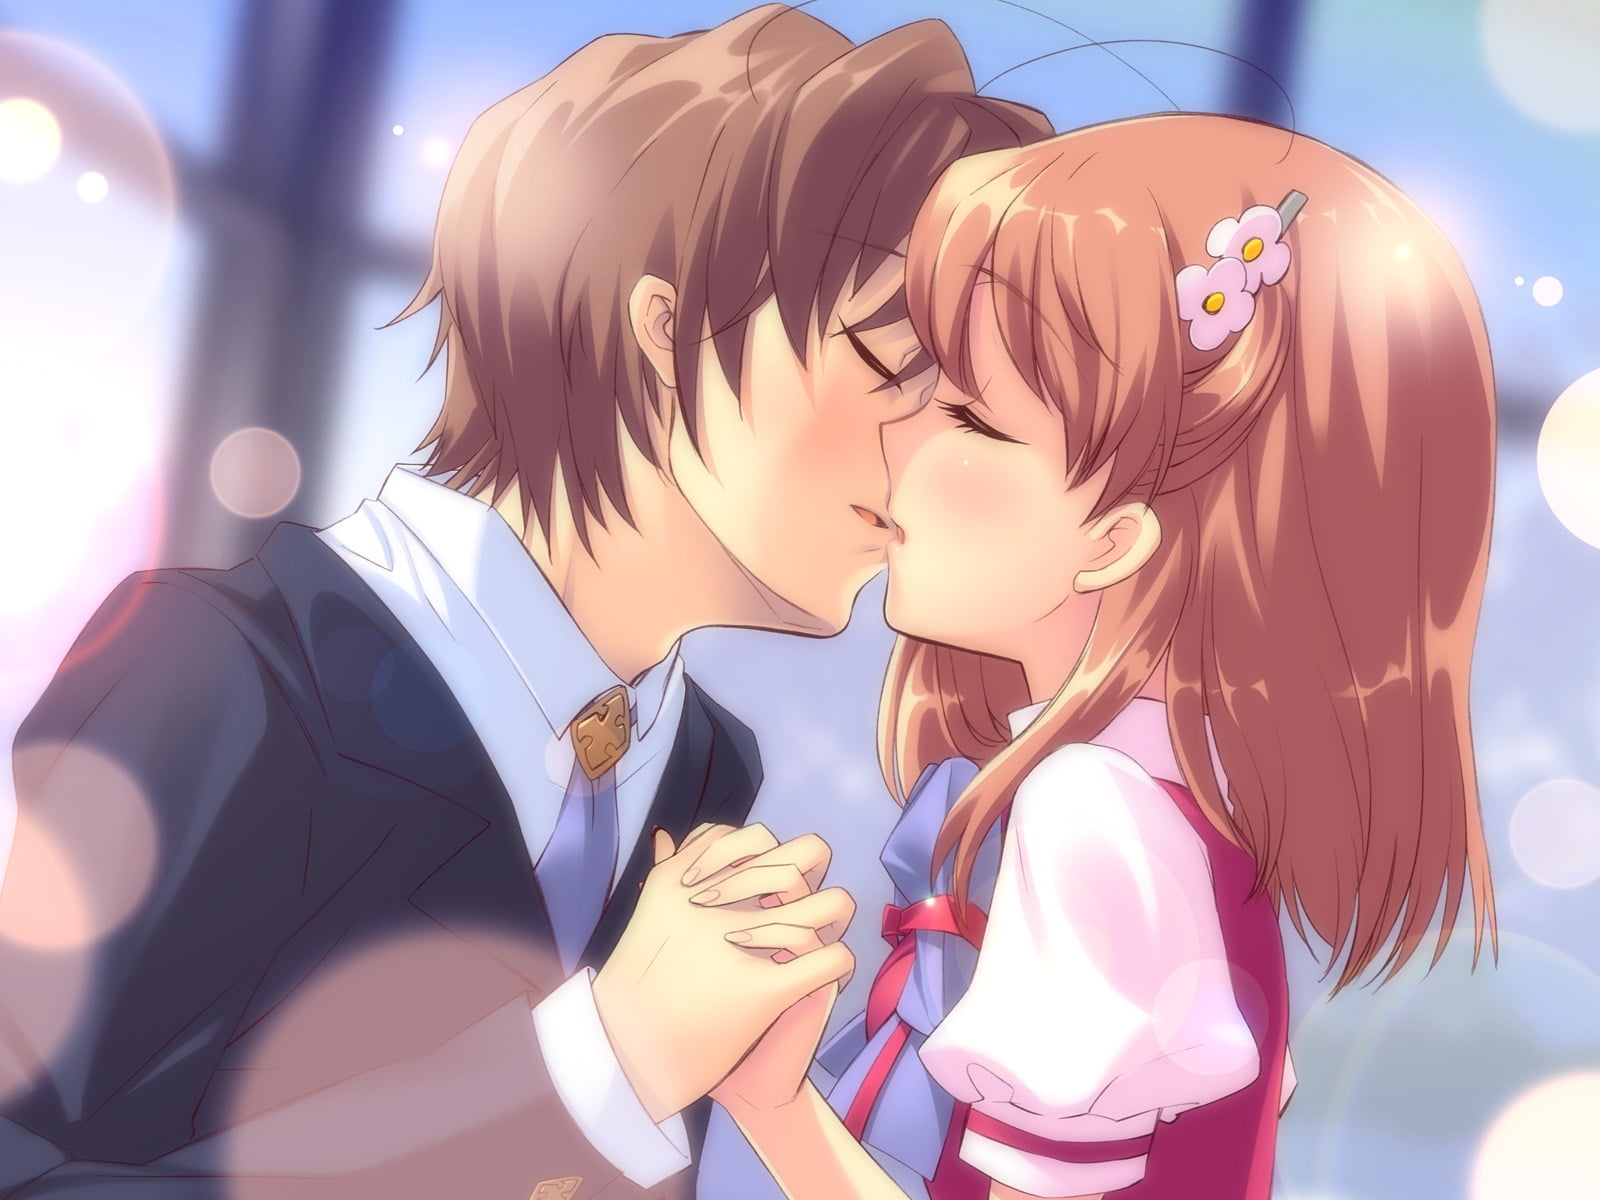 male and female anime character kissing each other HD wallpaper. 